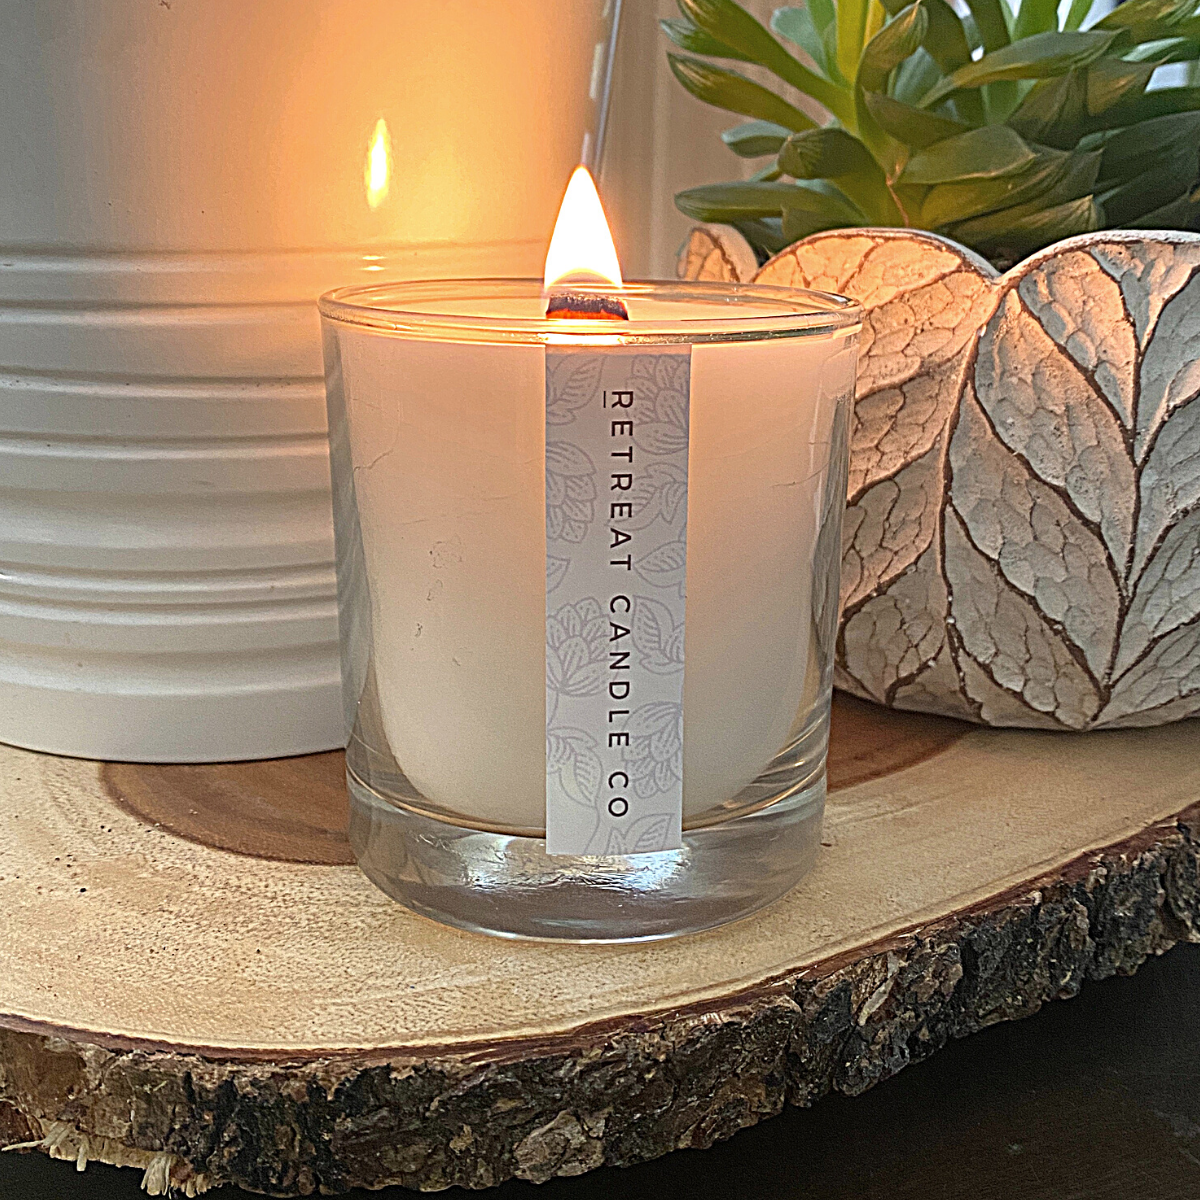 Fresh Linen Candle - #CandlesForACause - Partial proceeds of this candle gives back to kids mental health. Vegan. All-natural soy and coconut wax. Phthalate-free fragrances. Crackling wooden wick, and a seed paper bookmark to plant in your candle jar after. Feel good about what you buy. 